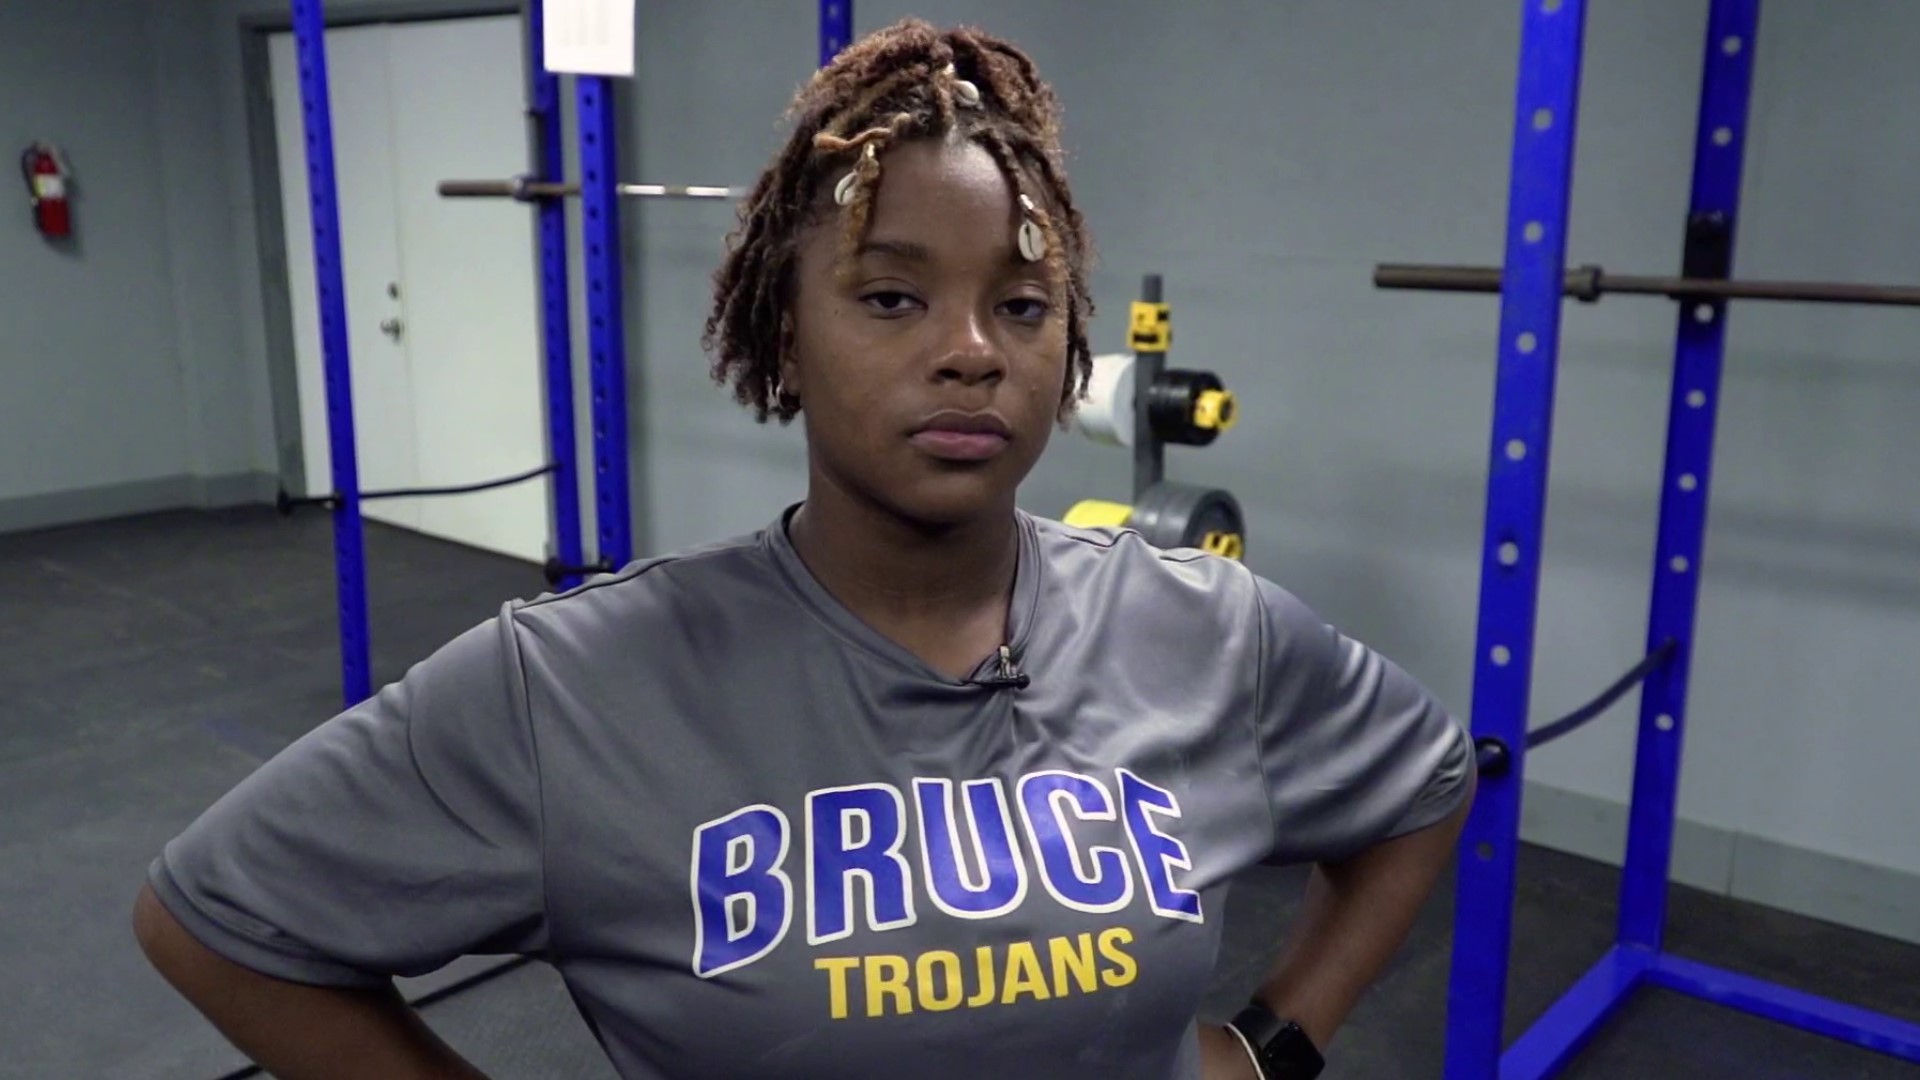 Diamond Campbell, 16, was about to be disqualified from her powerlifting championship for having beads in her hair. Her opponents stepped in to help her out.